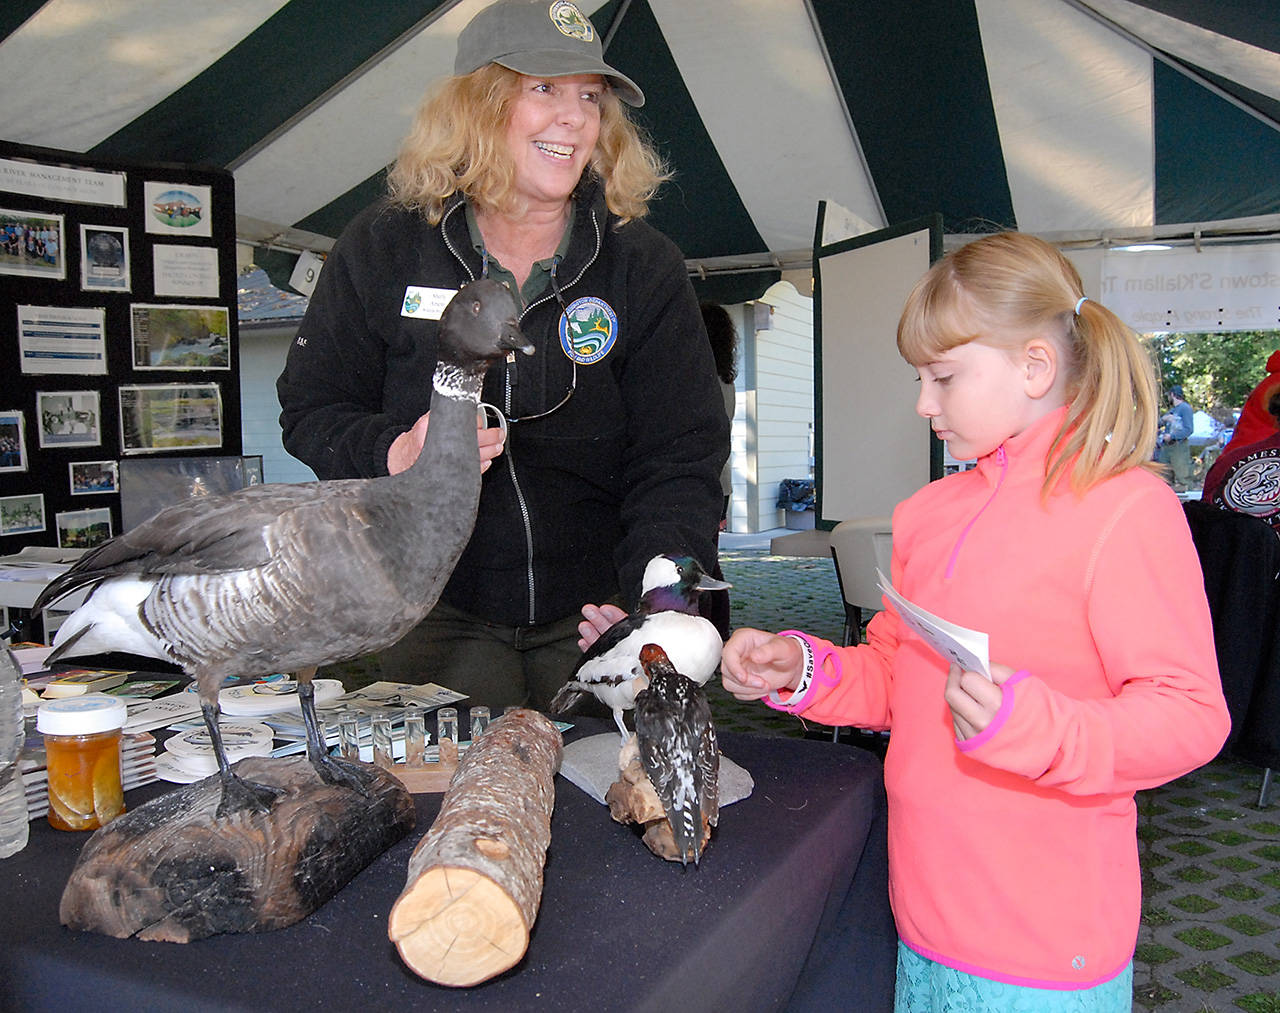 Eight-year-old Makenzi Seimer, a third-grade student at Greywolf Elementary School, examines a display of stuffed water fowl with Shelly Ament, a wildlife biologist with the state Department of Fish and Wildlife at Ament’s display at Friday’s Dungeness River Festival at Railroad Bridge Park in Sequim. (Keith Thorpe/Peninsula Daily News)